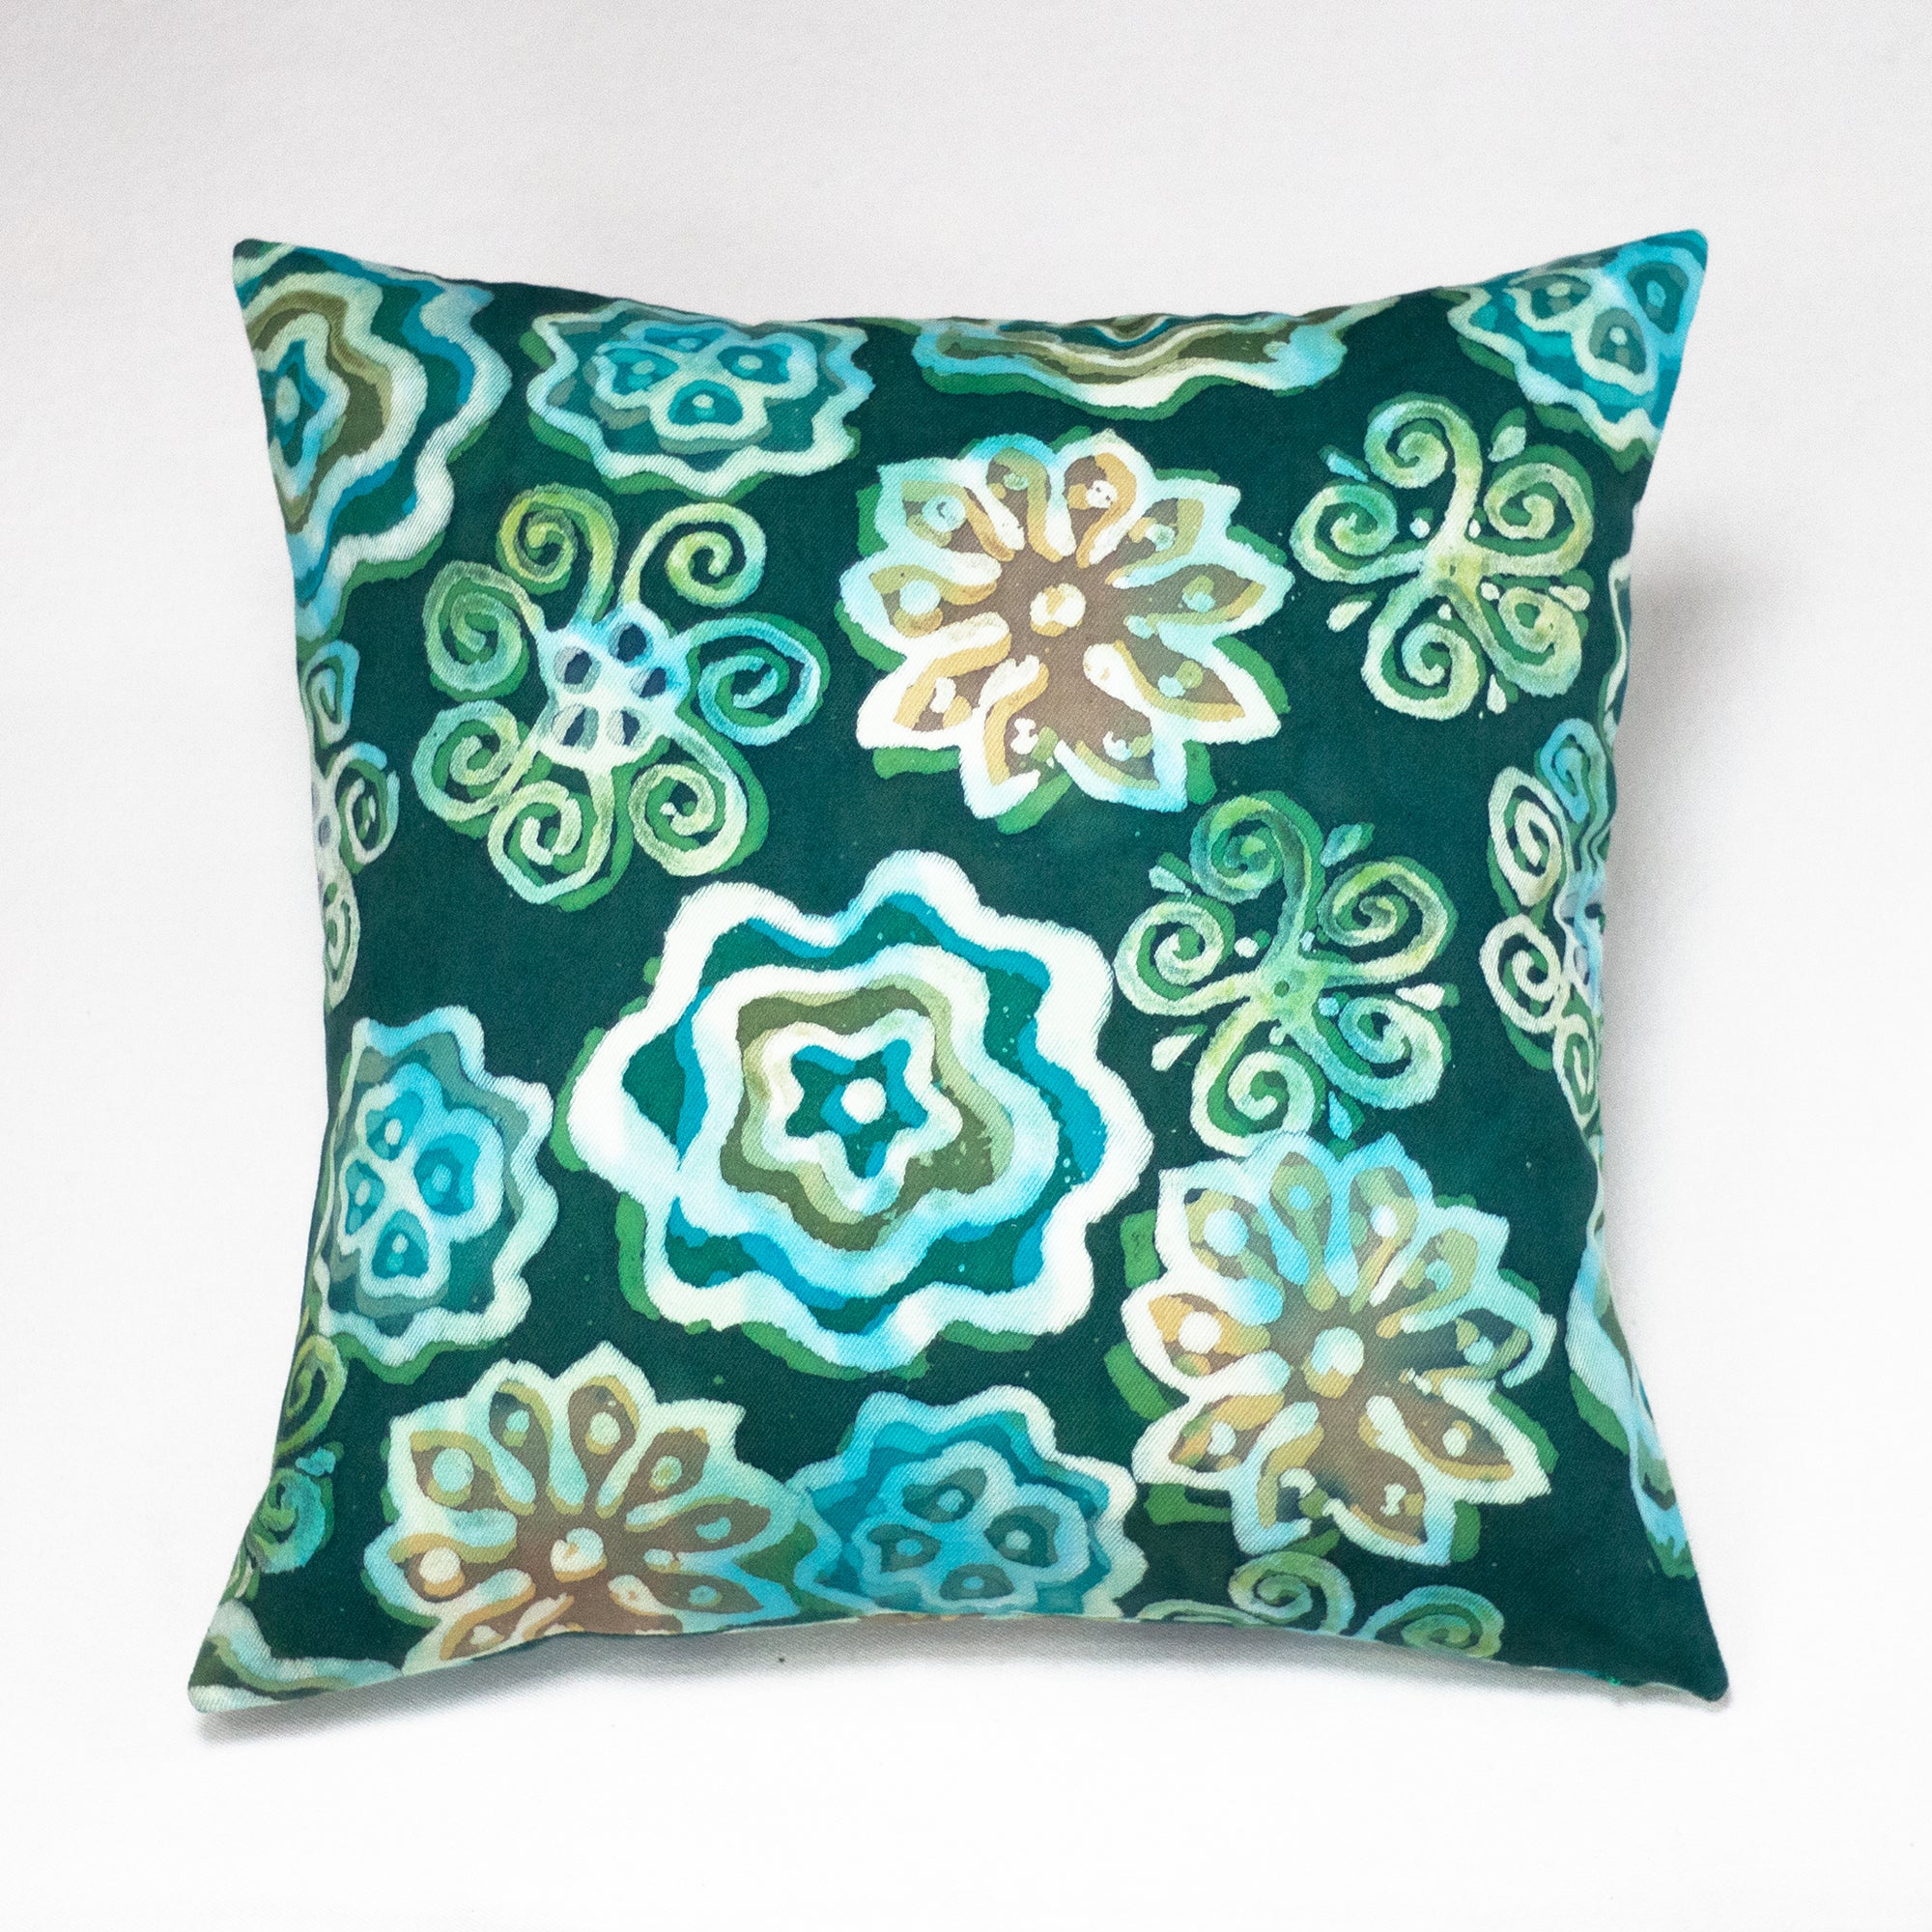 Hand Painted Accent Pillow Cover - Green Goddess